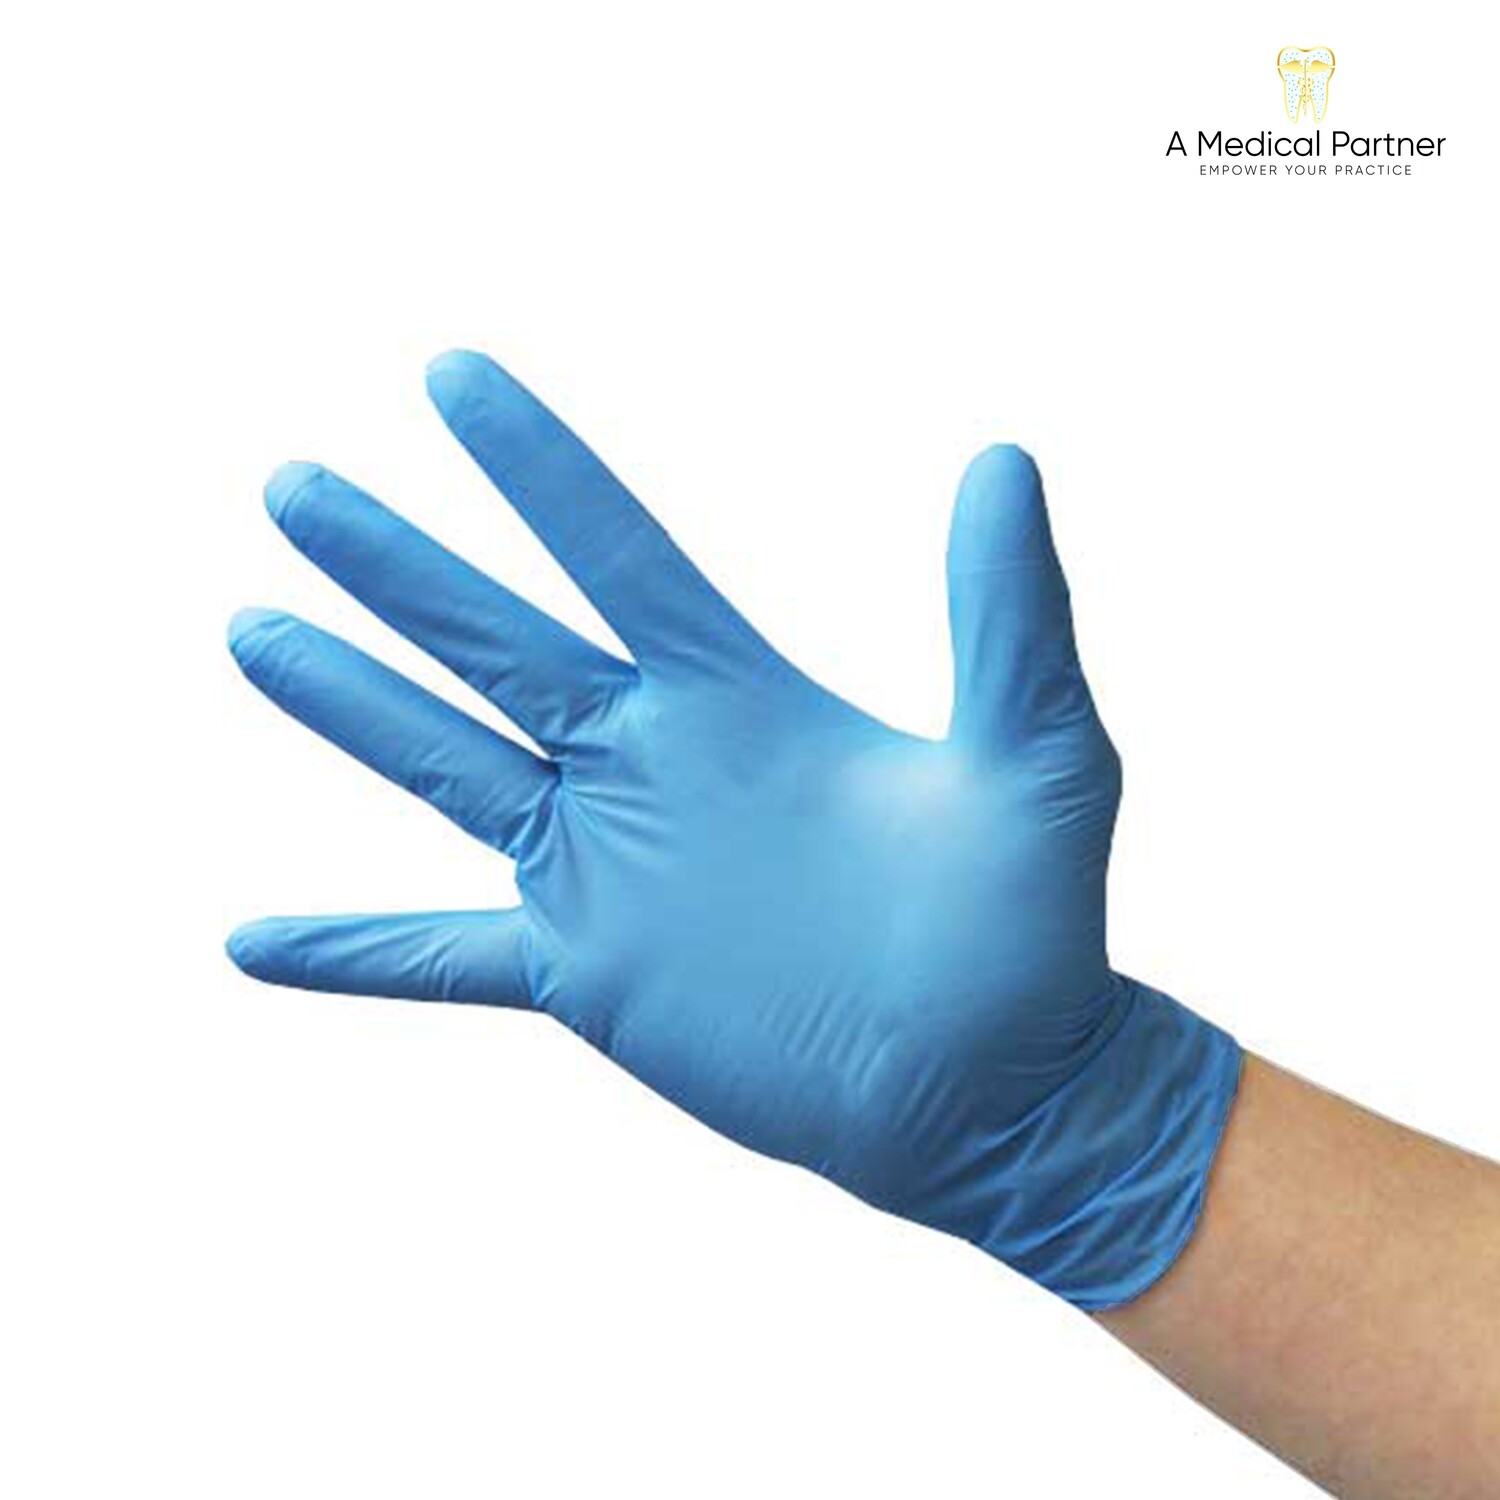 Alliance Nitrile Size Large - Case of 10 Boxes/1000 Gloves ($12.90 Per 100)